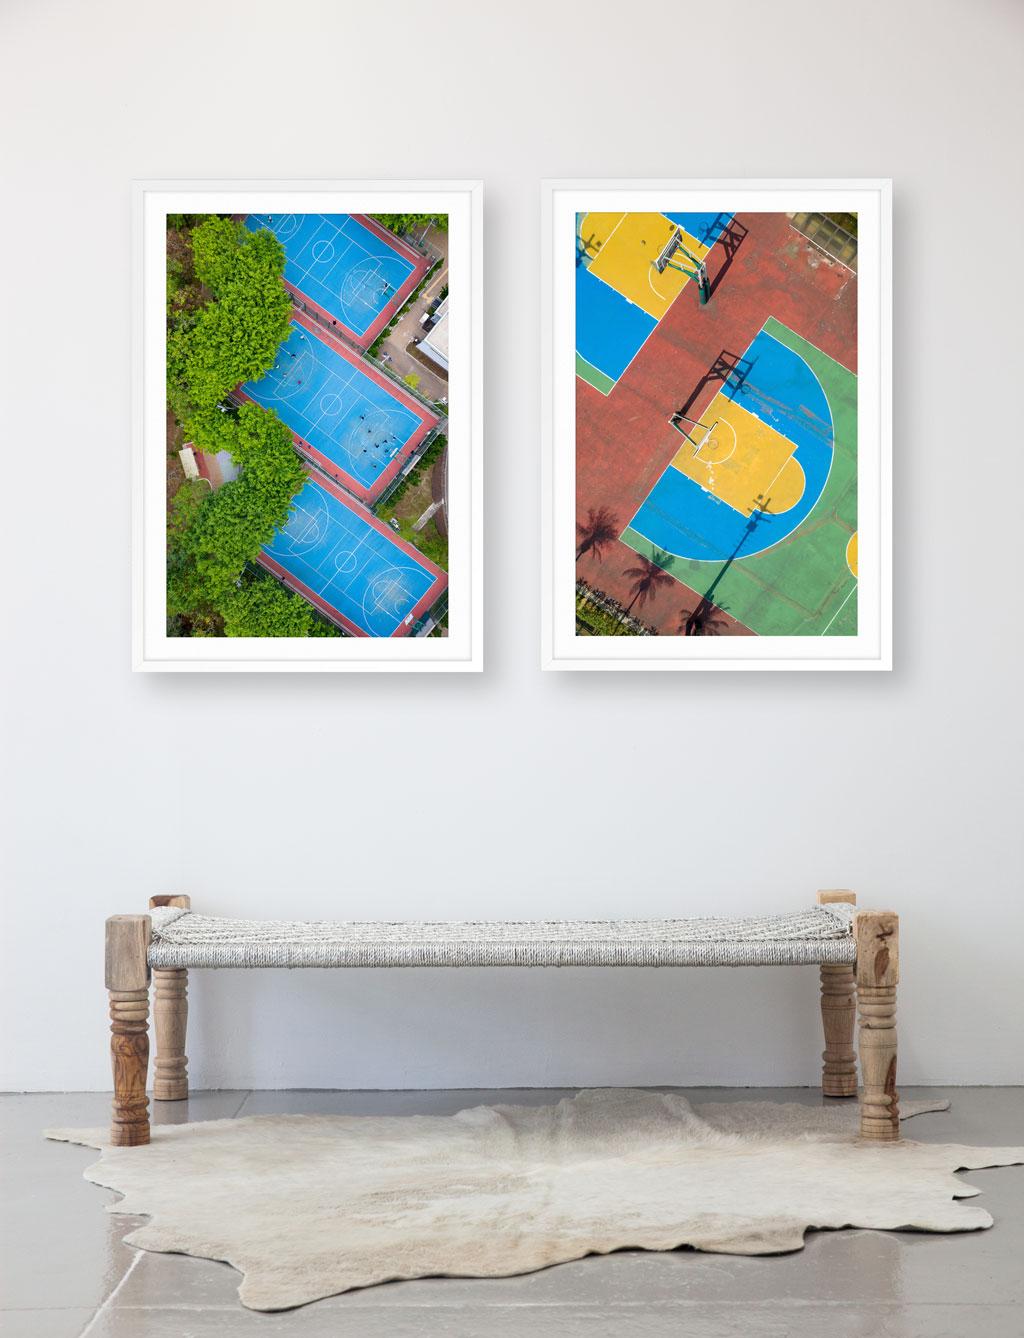 Top Down Court 2 - Print by Austin Bell